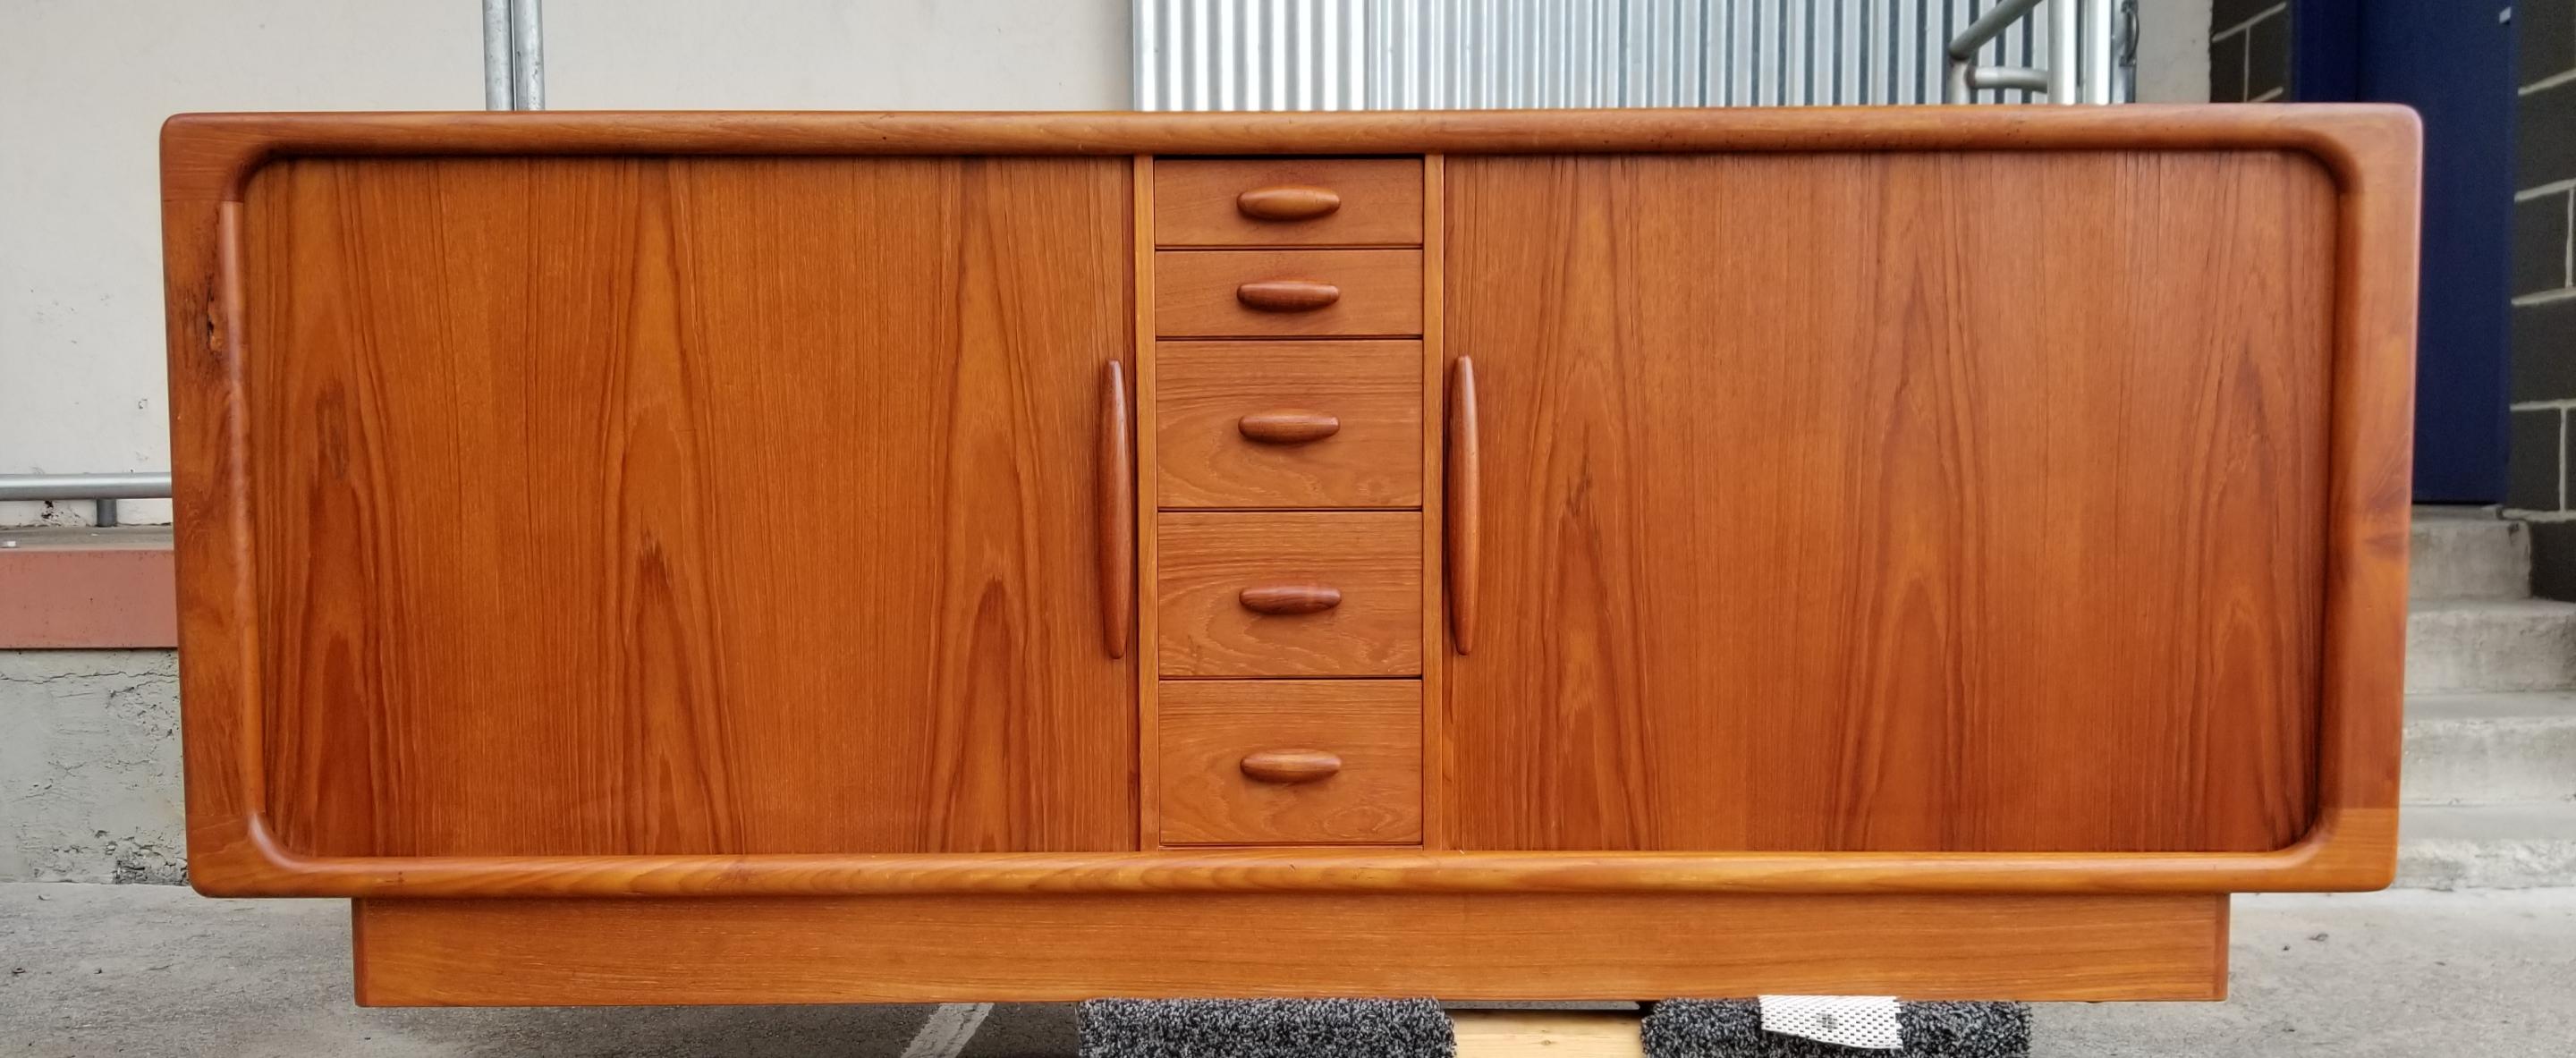 Teak Danish modern credenza by Dyrlund Furniture, Denmark. Sliding tambour doors open to a fitted interior with a bank of five solid oak finger jointed drawers and adjustable shelf. Five small drawers at center. Teak pulls. Measures 74.5